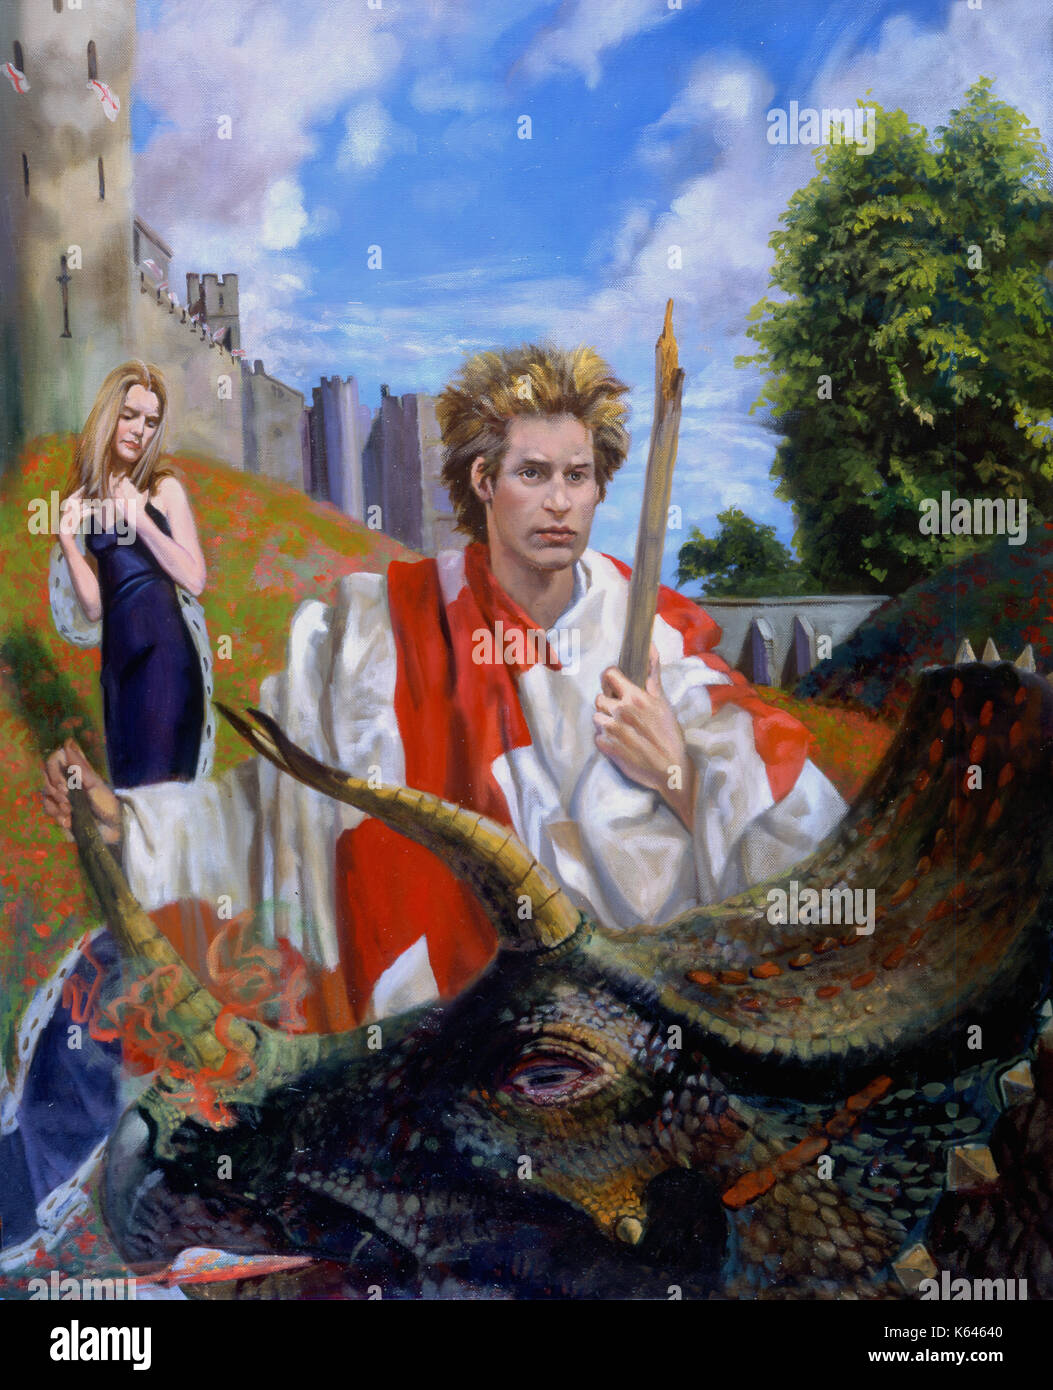 SAINT GEORGE, THE LADY AND THE DRAGON-oil on linen, 2006, Dimensions: 127x102 Allegory of Prince William, as England's patron saint, swathed in the Flag of St. George standing in front of Arundel Castle holding a broken lance. In the foreground the head of the dragon, a Anchiceratops dinosaur, nostrils flaming. The lady standing behind St George, slightly resembles the Duchess of Cambridge. The fields are covered with poppies. Stock Photo